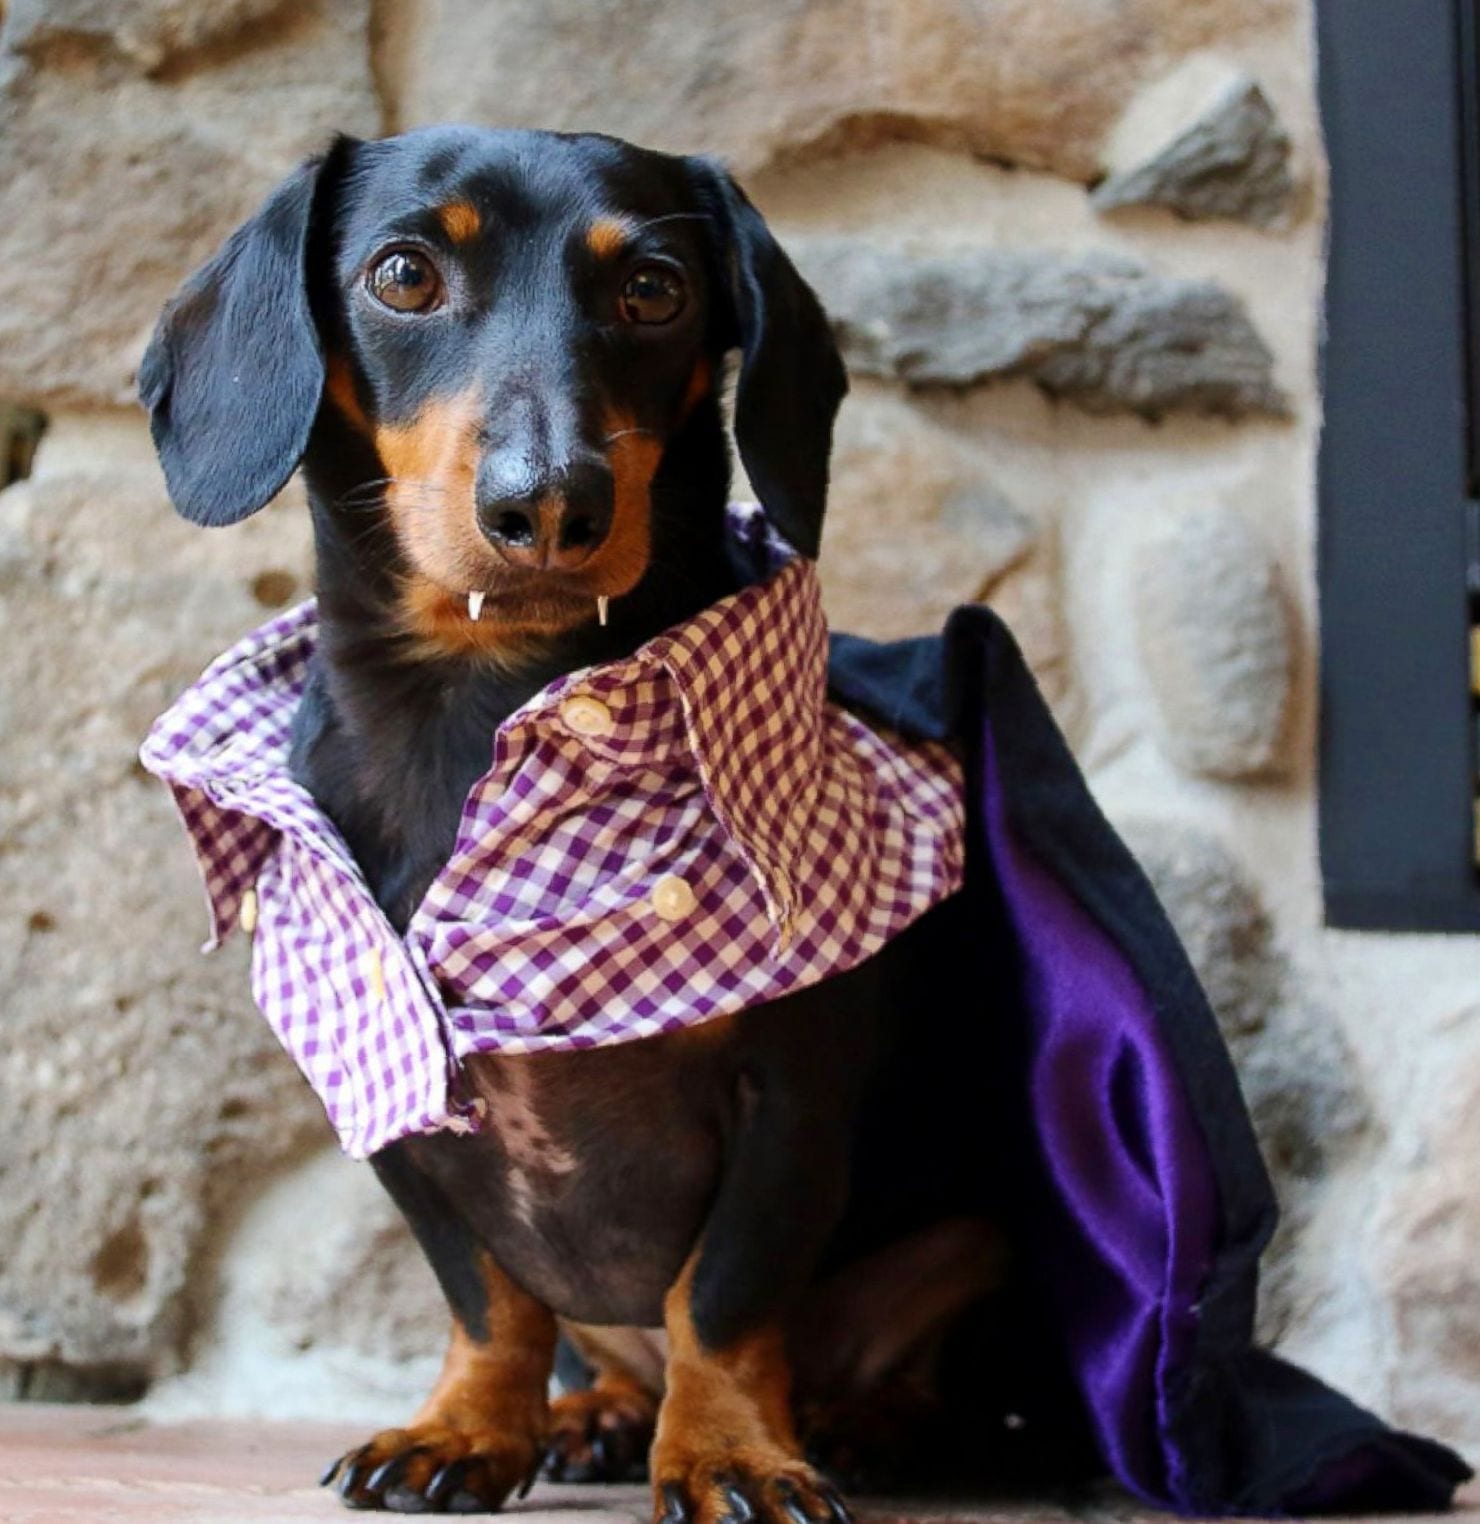 A Dachshund in dracula costume while sitting on top of the table